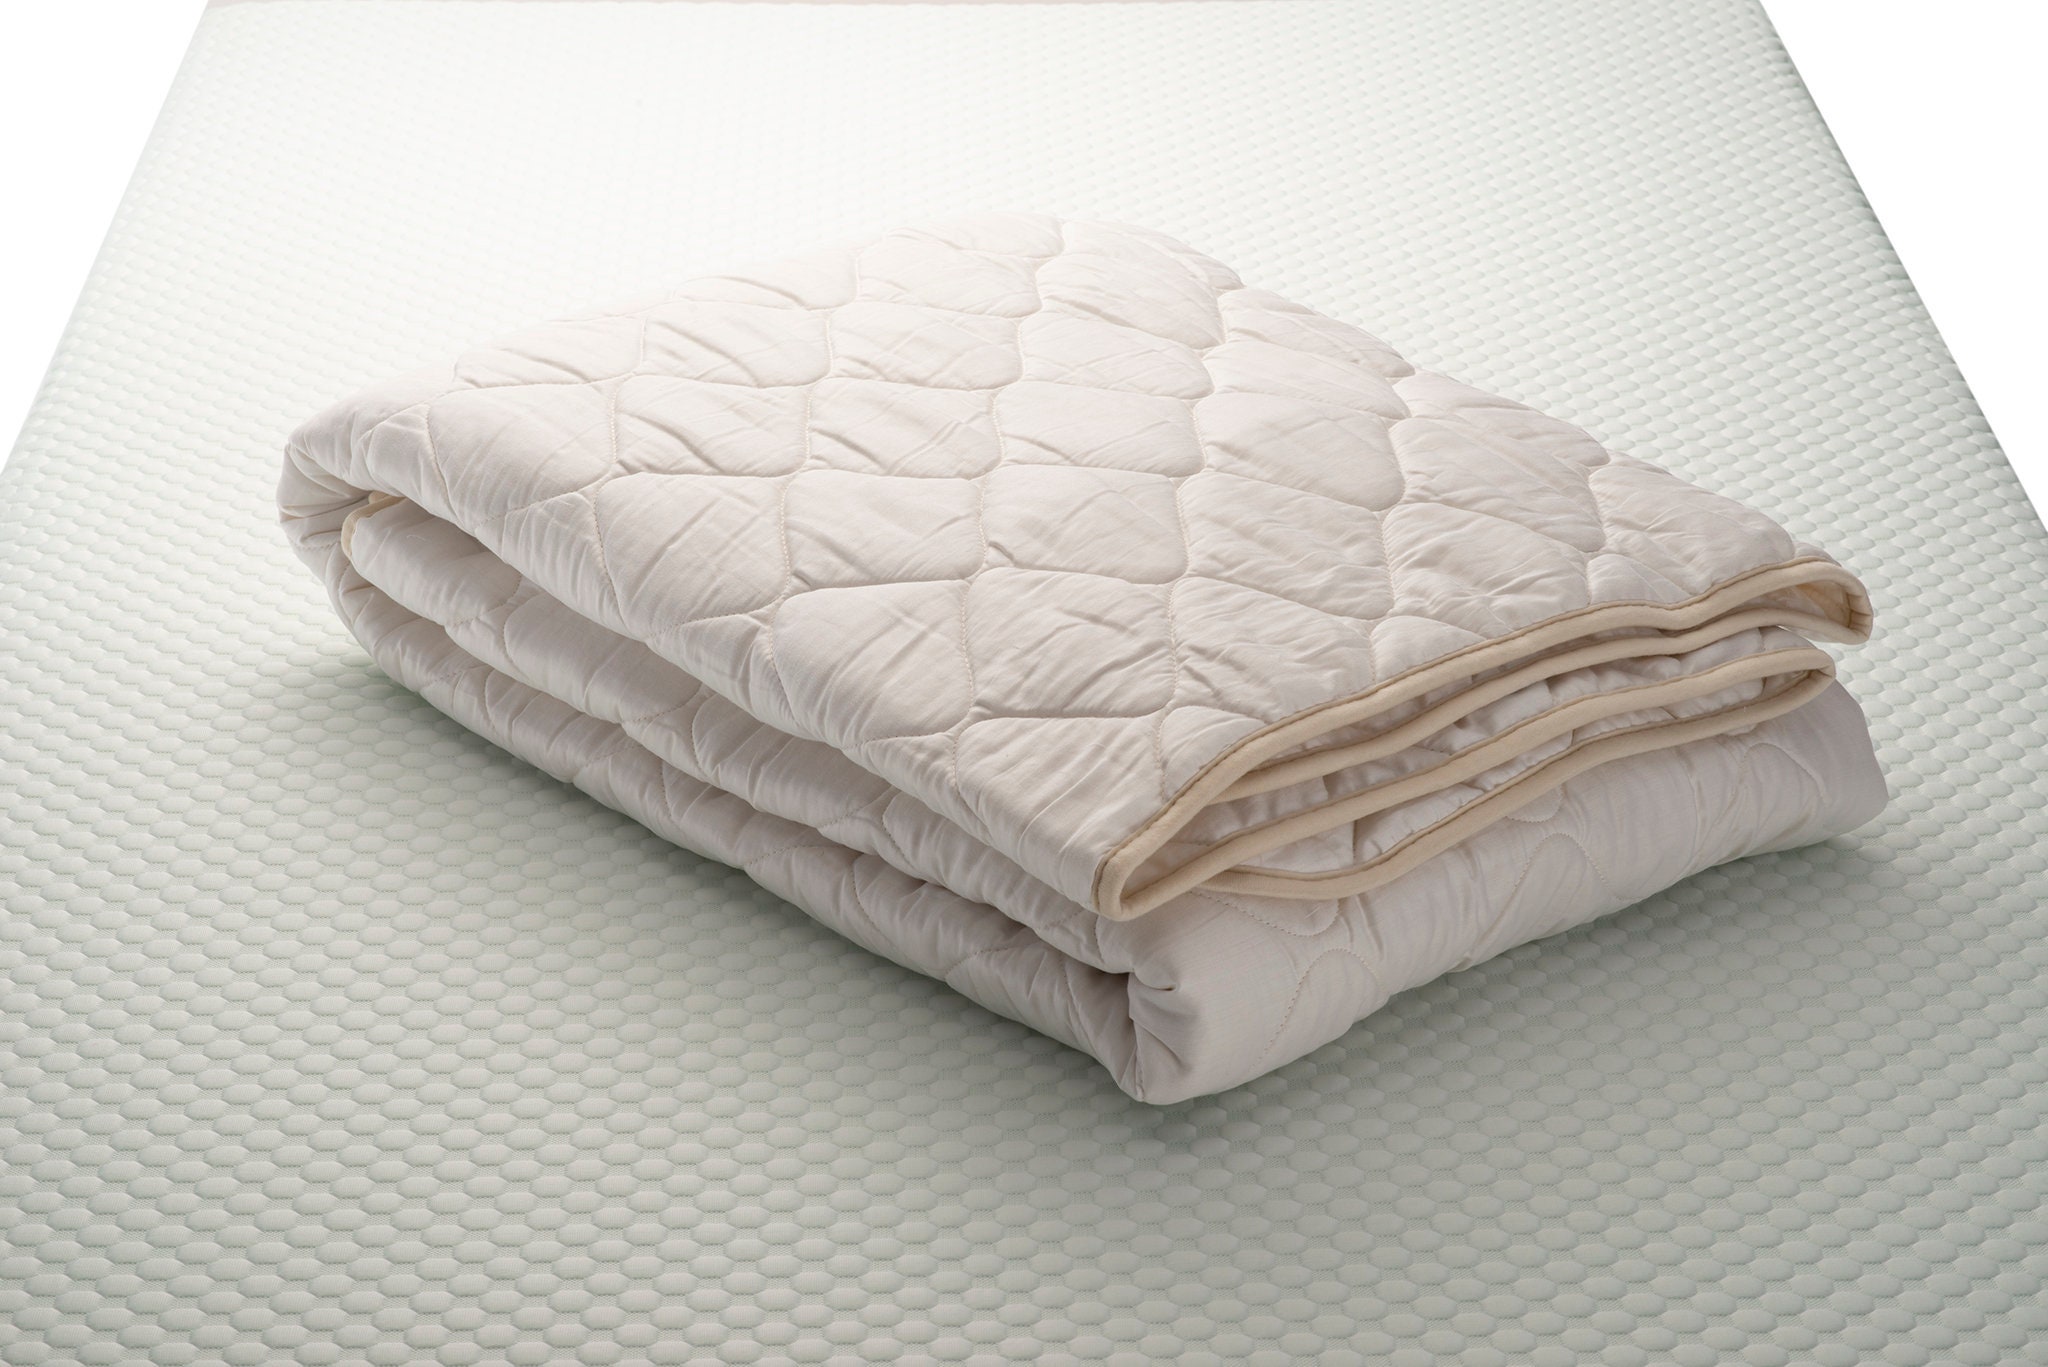 Quilted Wool Filled Duvet Insert All Sizes Creamy Or White